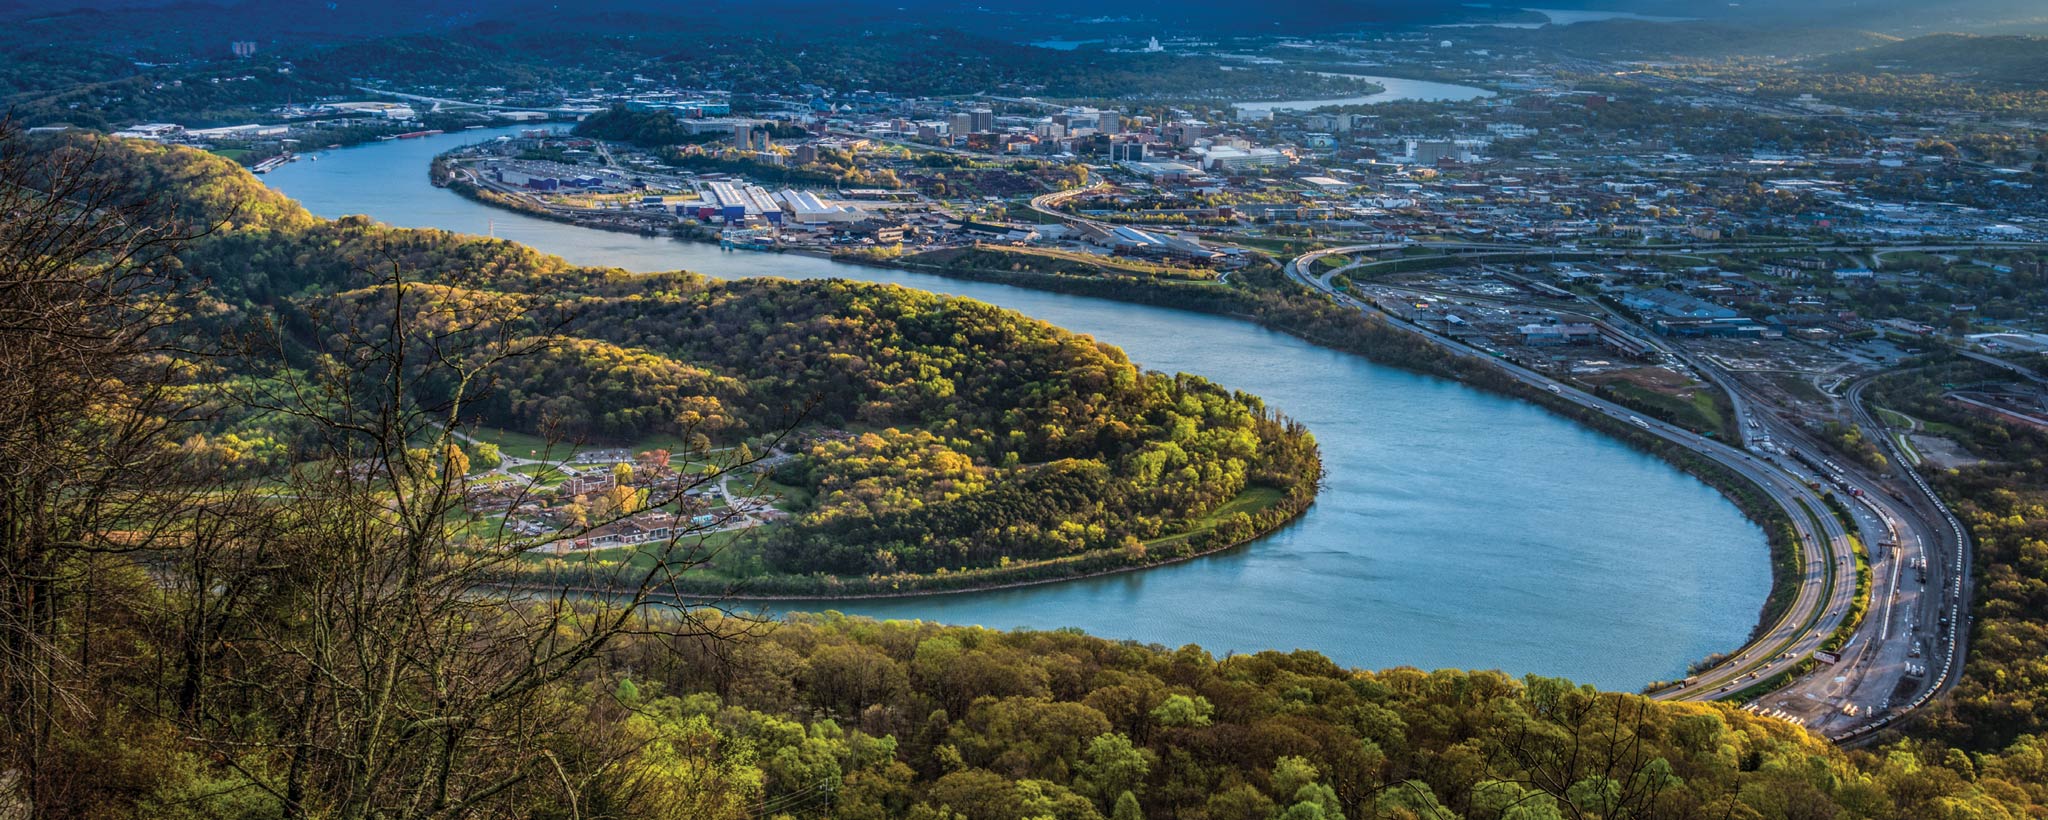 Drone Aerial View of Downtown Chattanooga Tennessee and Tennessee River